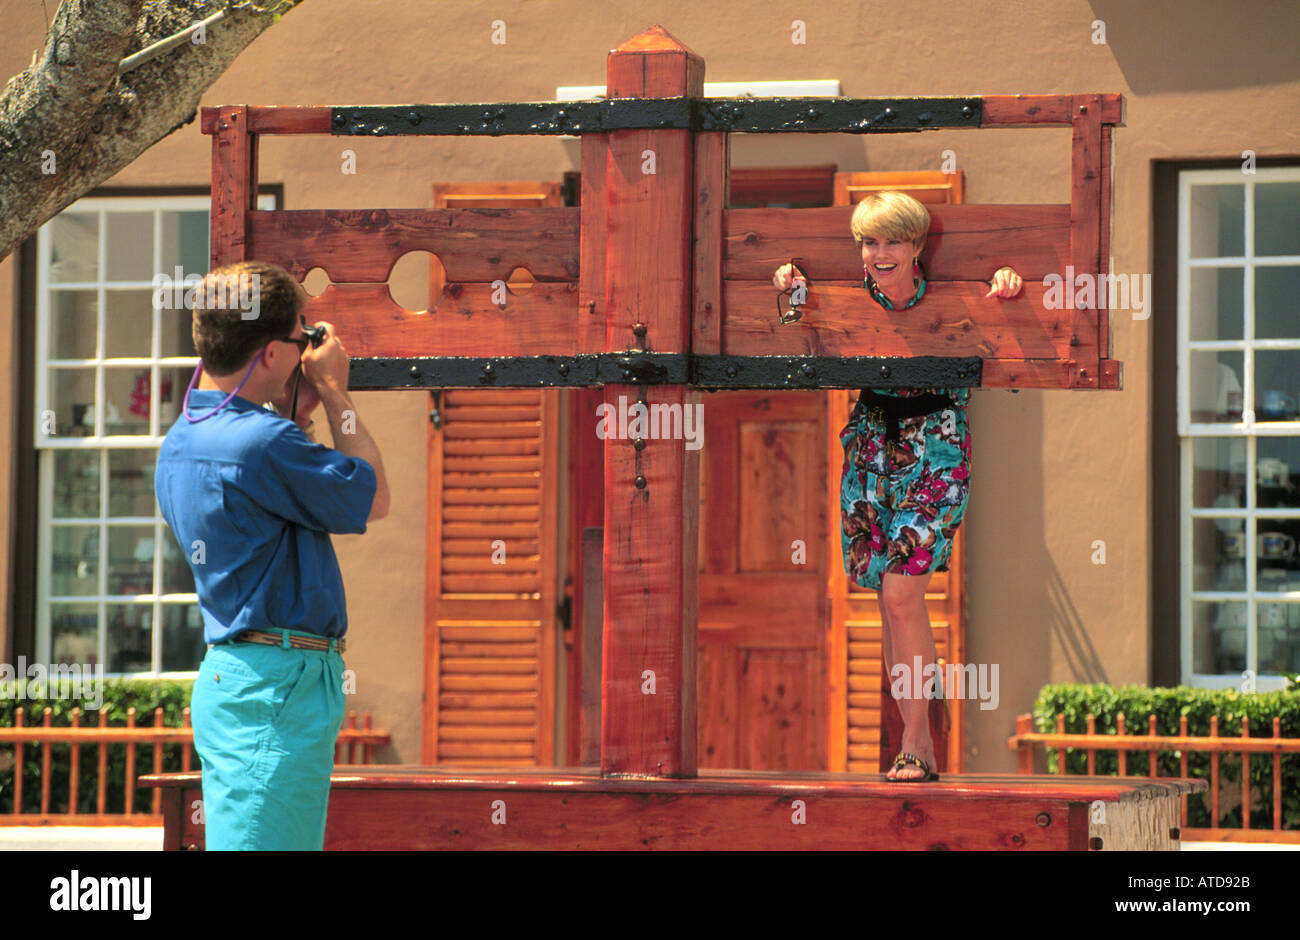 A man takes a picture or a woman playfully trapped in a wooden stockade in St Georges Bermuda Stock Photo